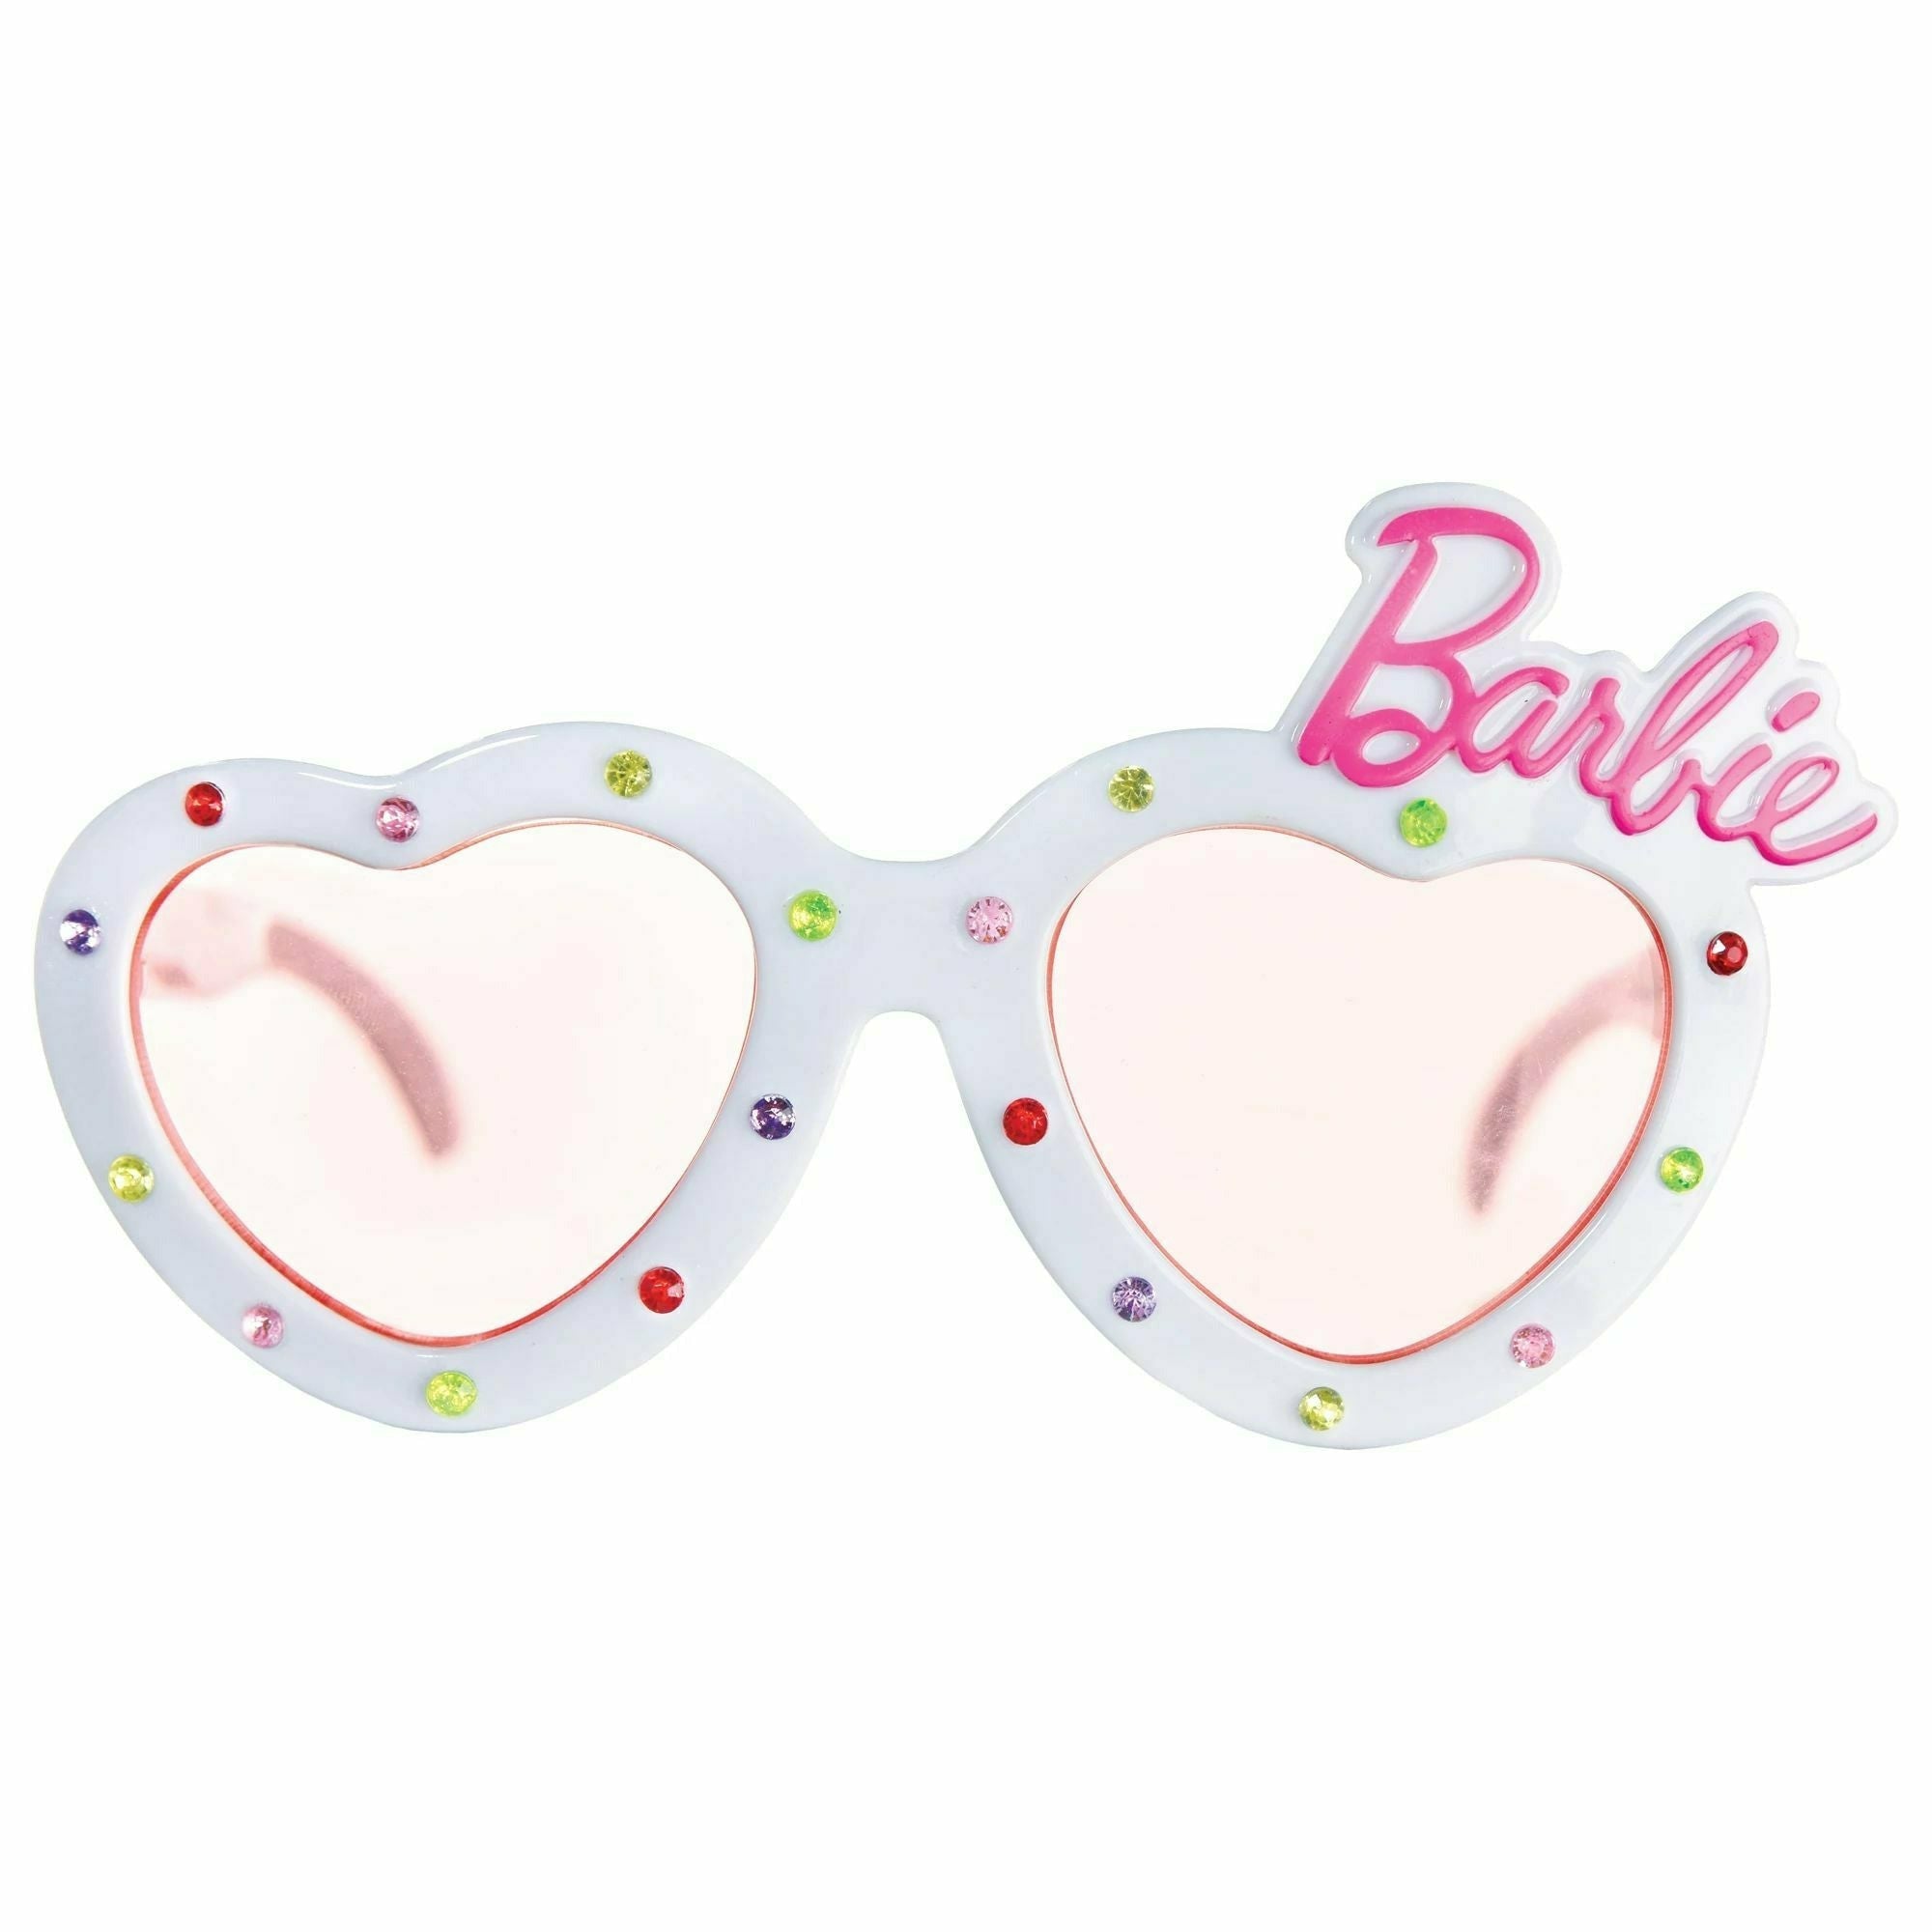 Barbie Dream Together Deluxe Wearable Glasses